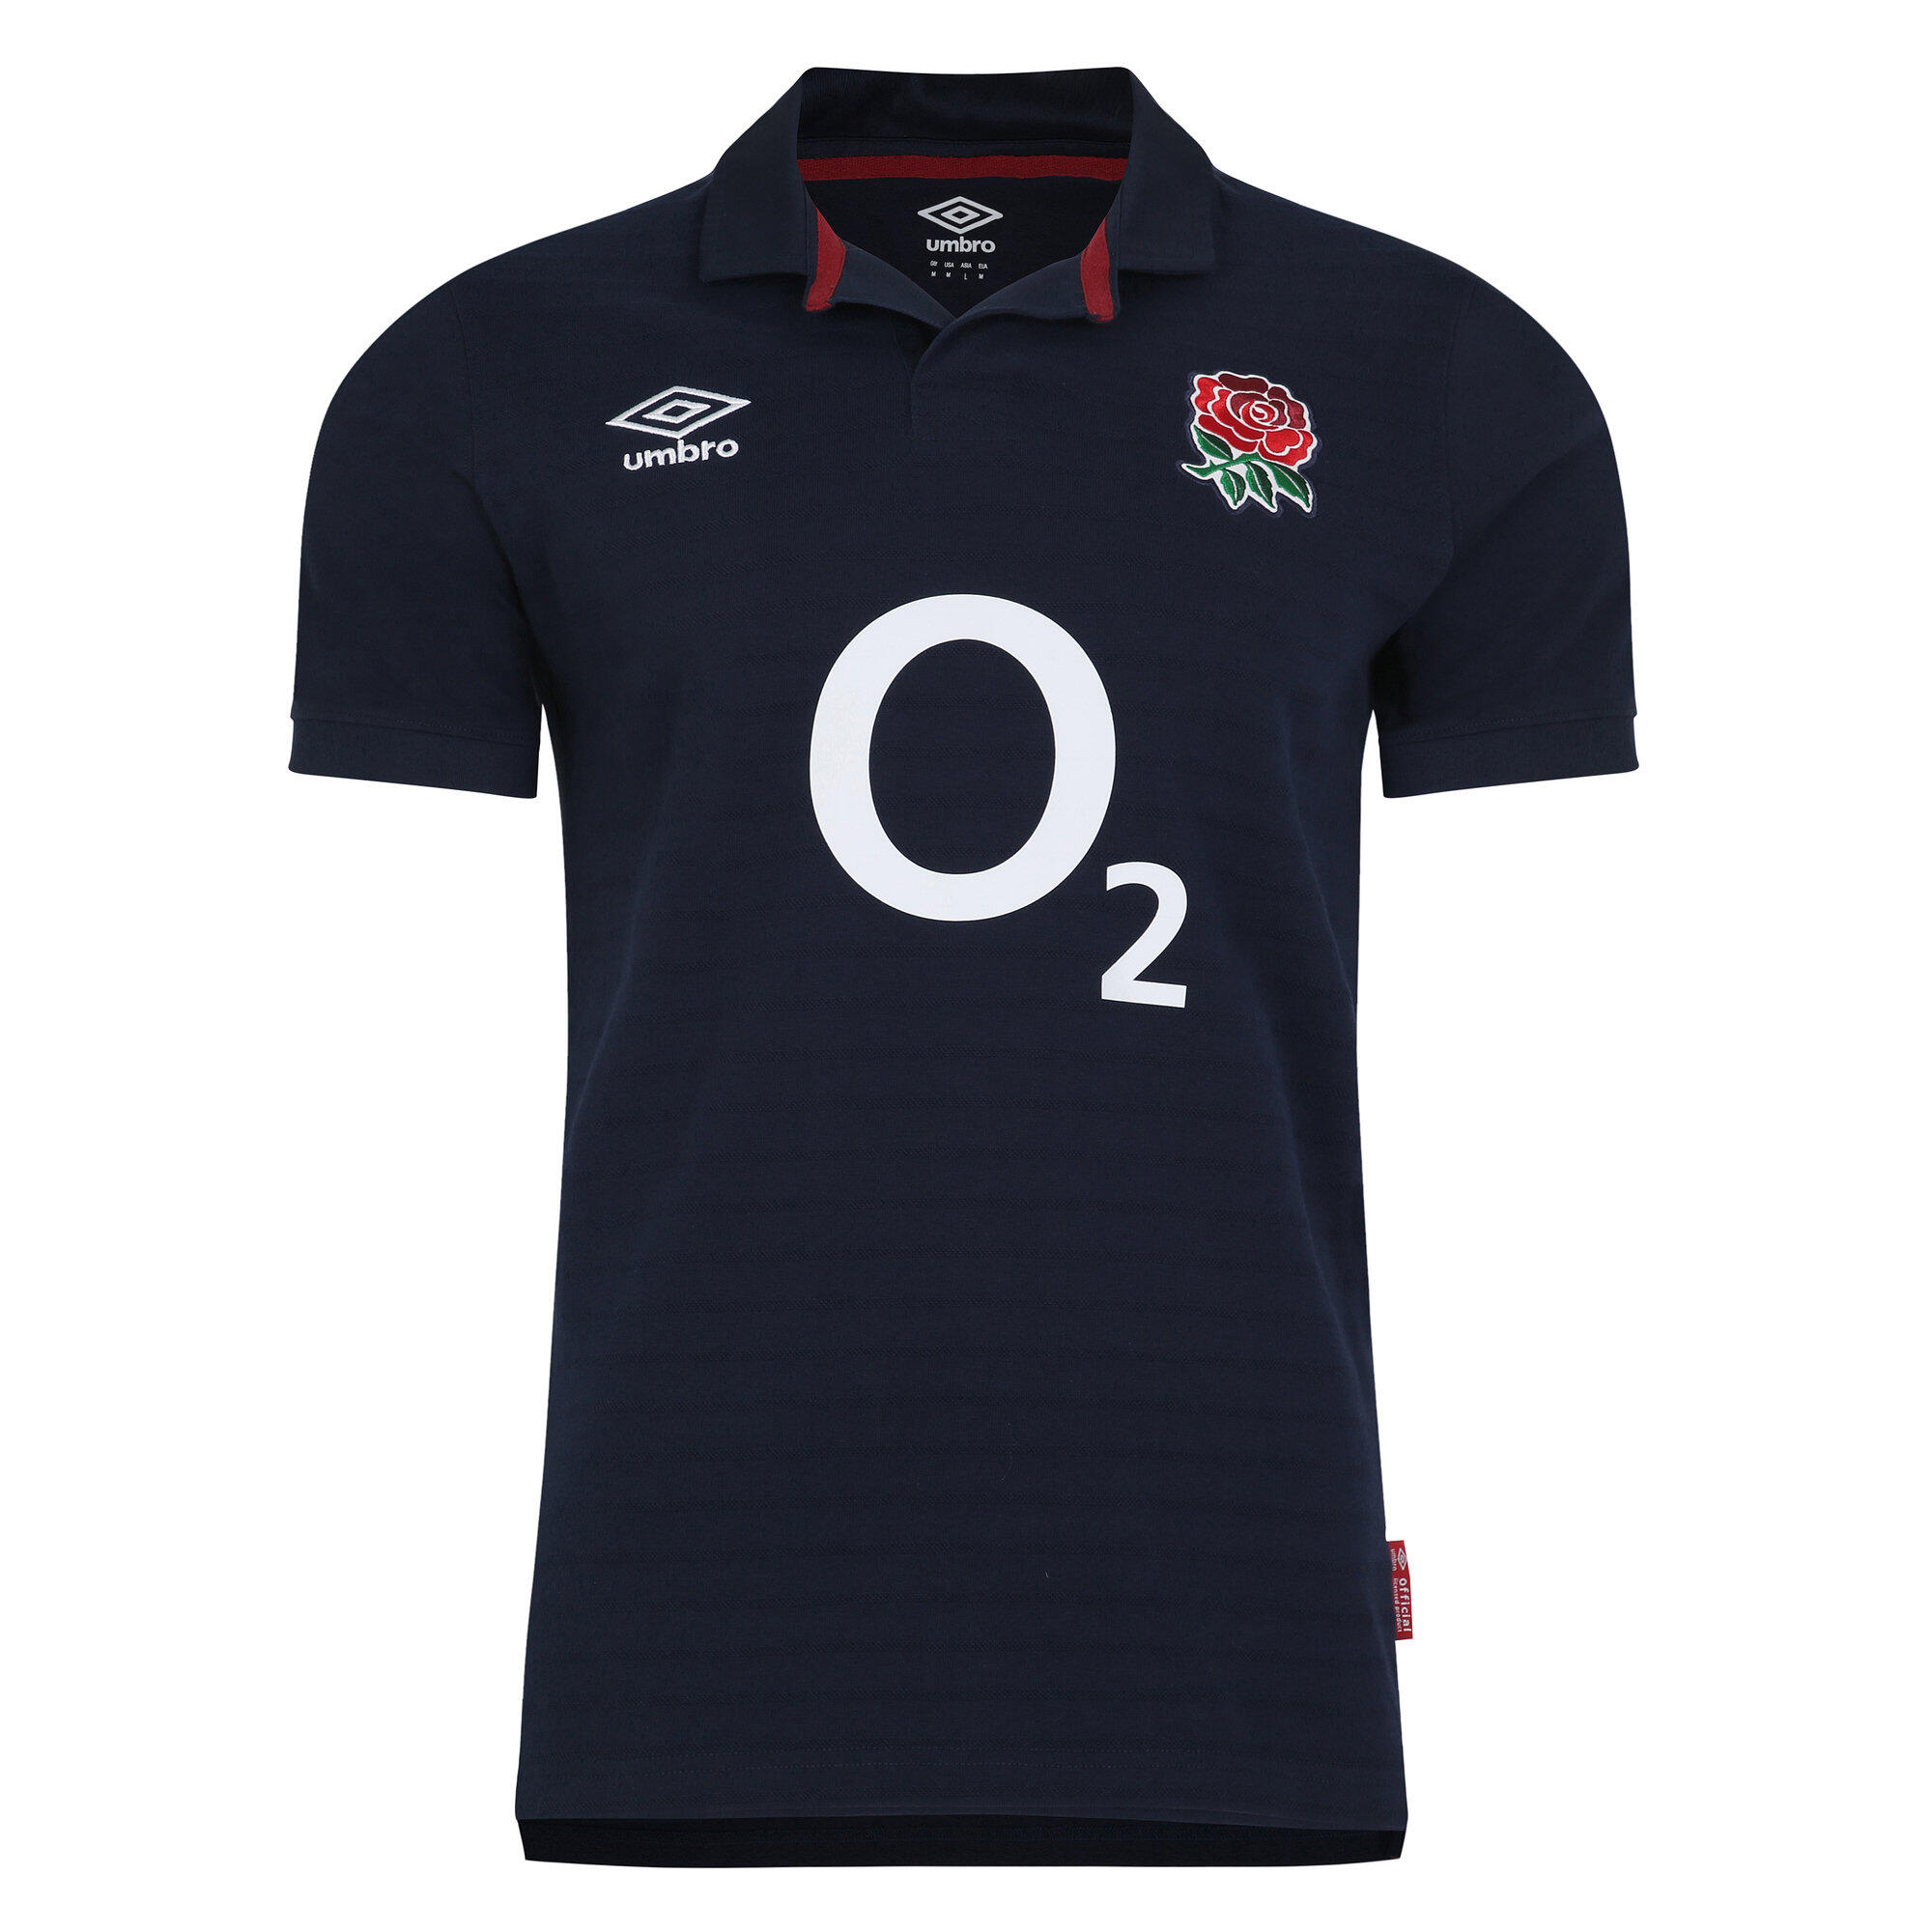 UMBRO Unisex Adult 23/24 England Rugby Alternative Jersey (Navy Blue/White/Red)